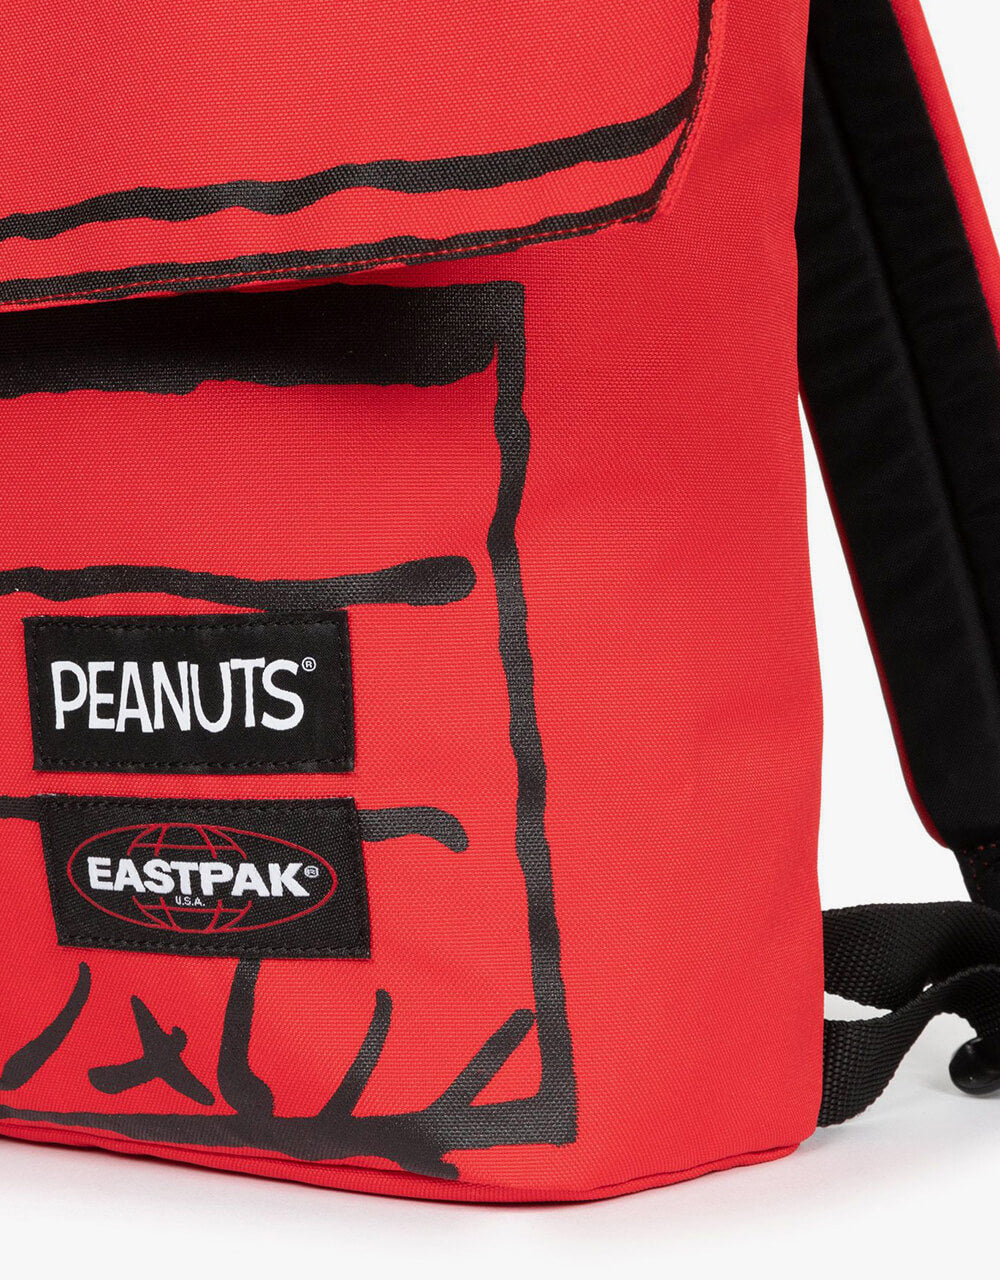 Eastpak x Peanuts Snoopy House Backpack - Peanuts House – Route One